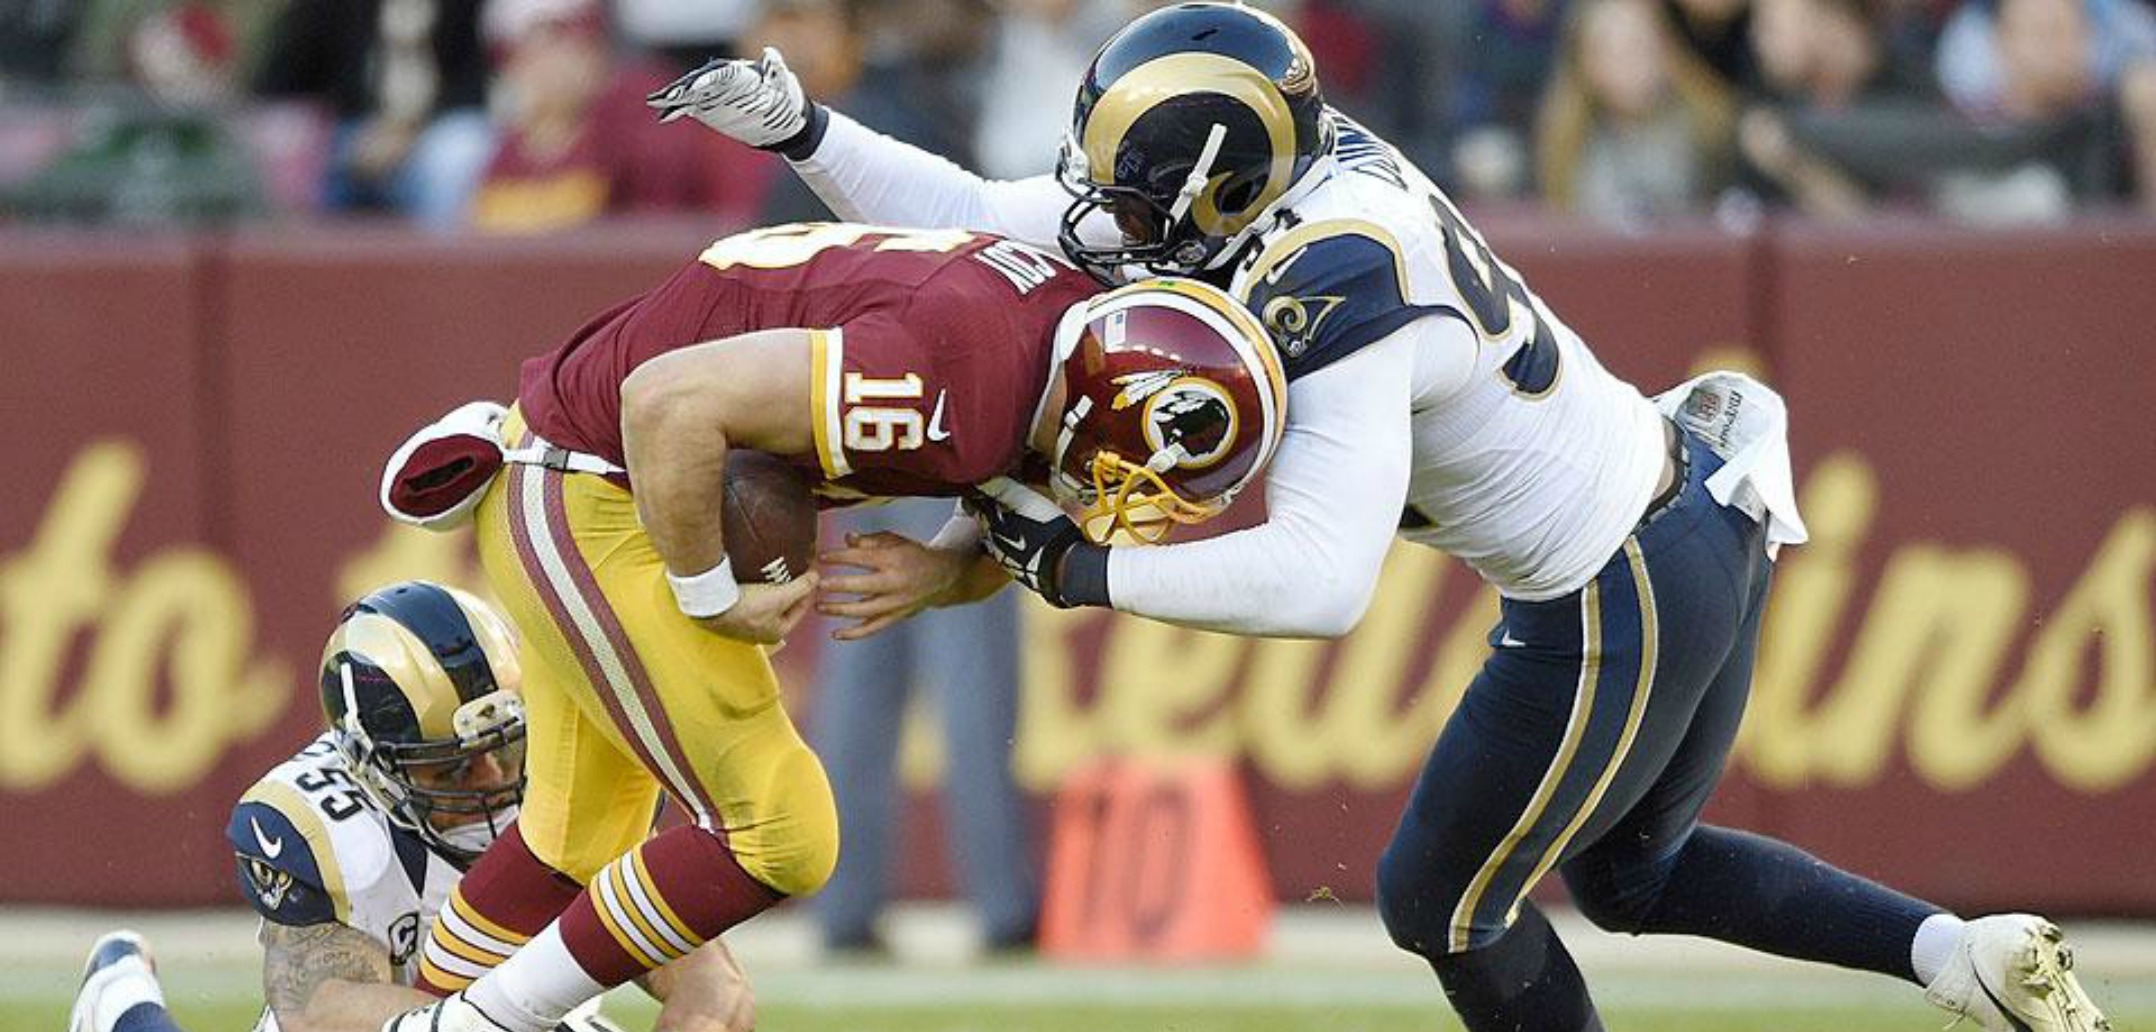 Courtesy of SI.com: Th Rams defense could put a hurting on Arizona's playoff aspirations. 